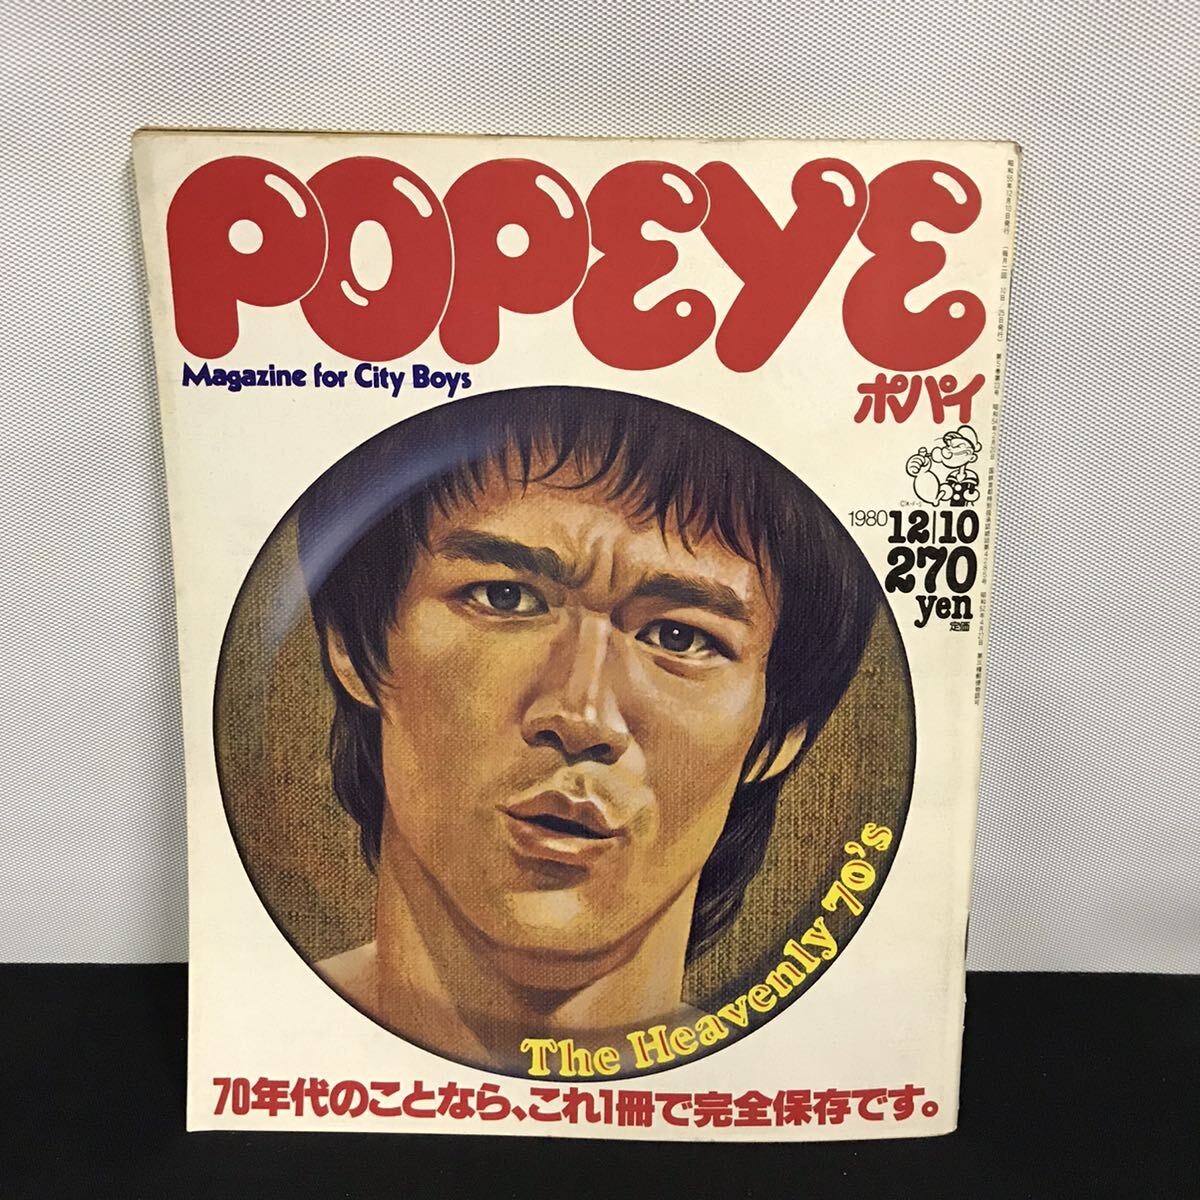 E1645 is # POPEYE Popeye 1980 year 12 month 10 day issue 